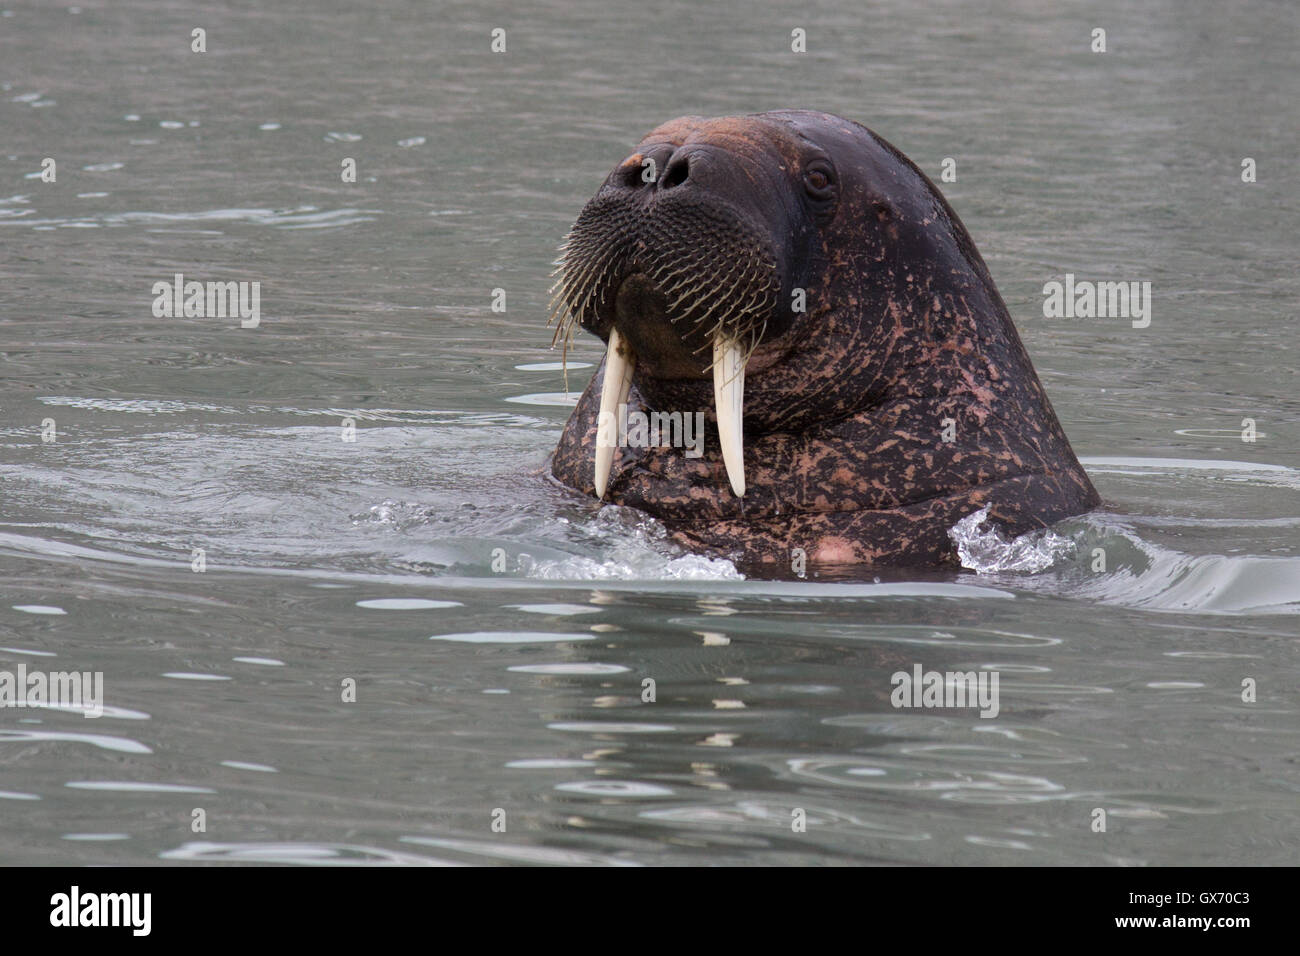 Walrus in water showing off its tusks Stock Photo